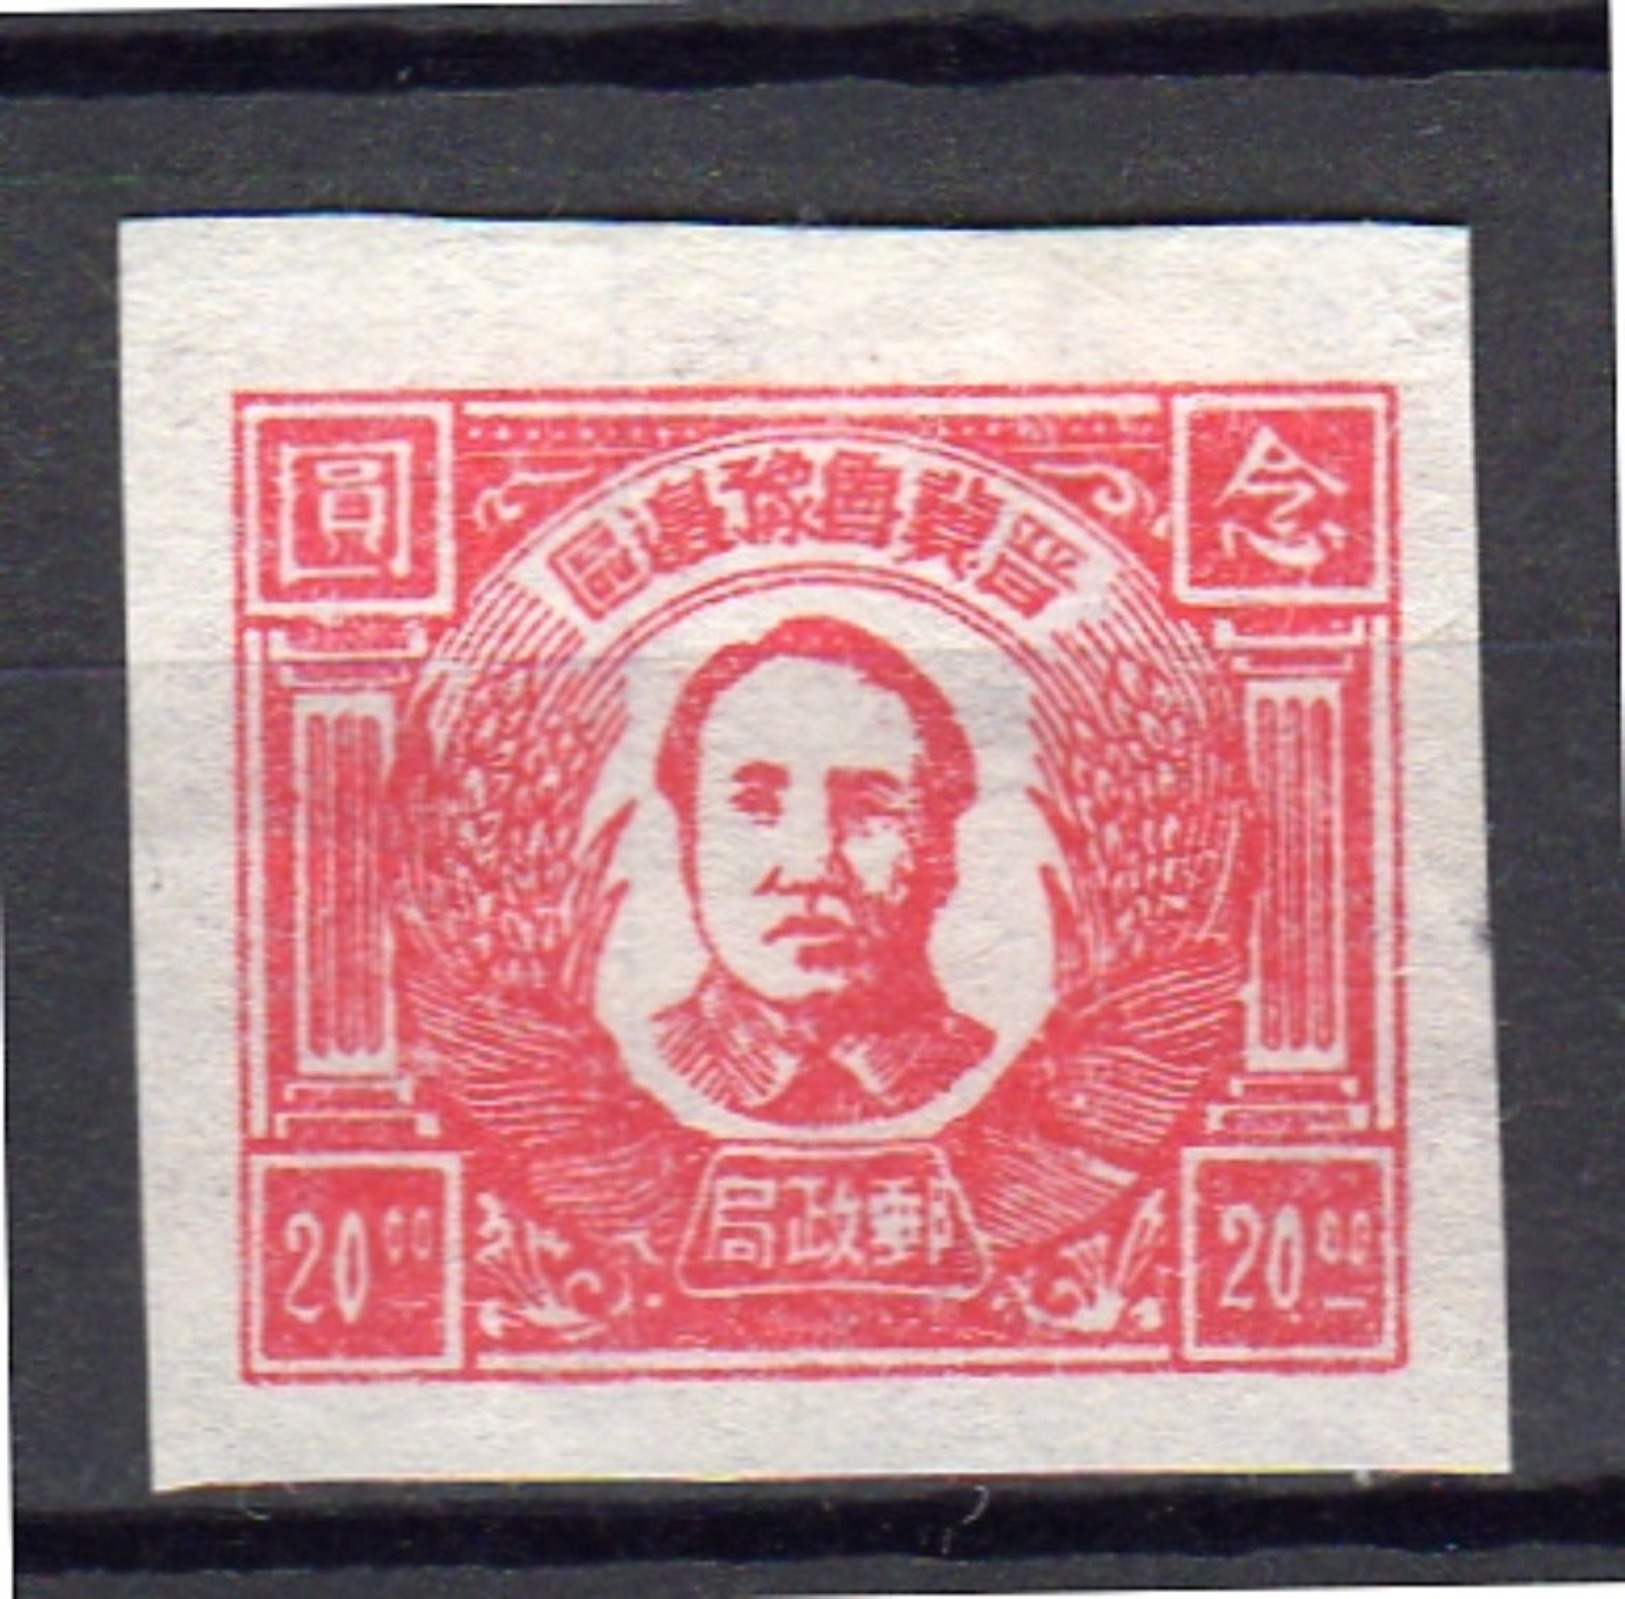 1947 Mao With Harvest $ 20 Yang NC231 UNDERVALUED And Scarce MNH (nc68) - Northern China 1949-50